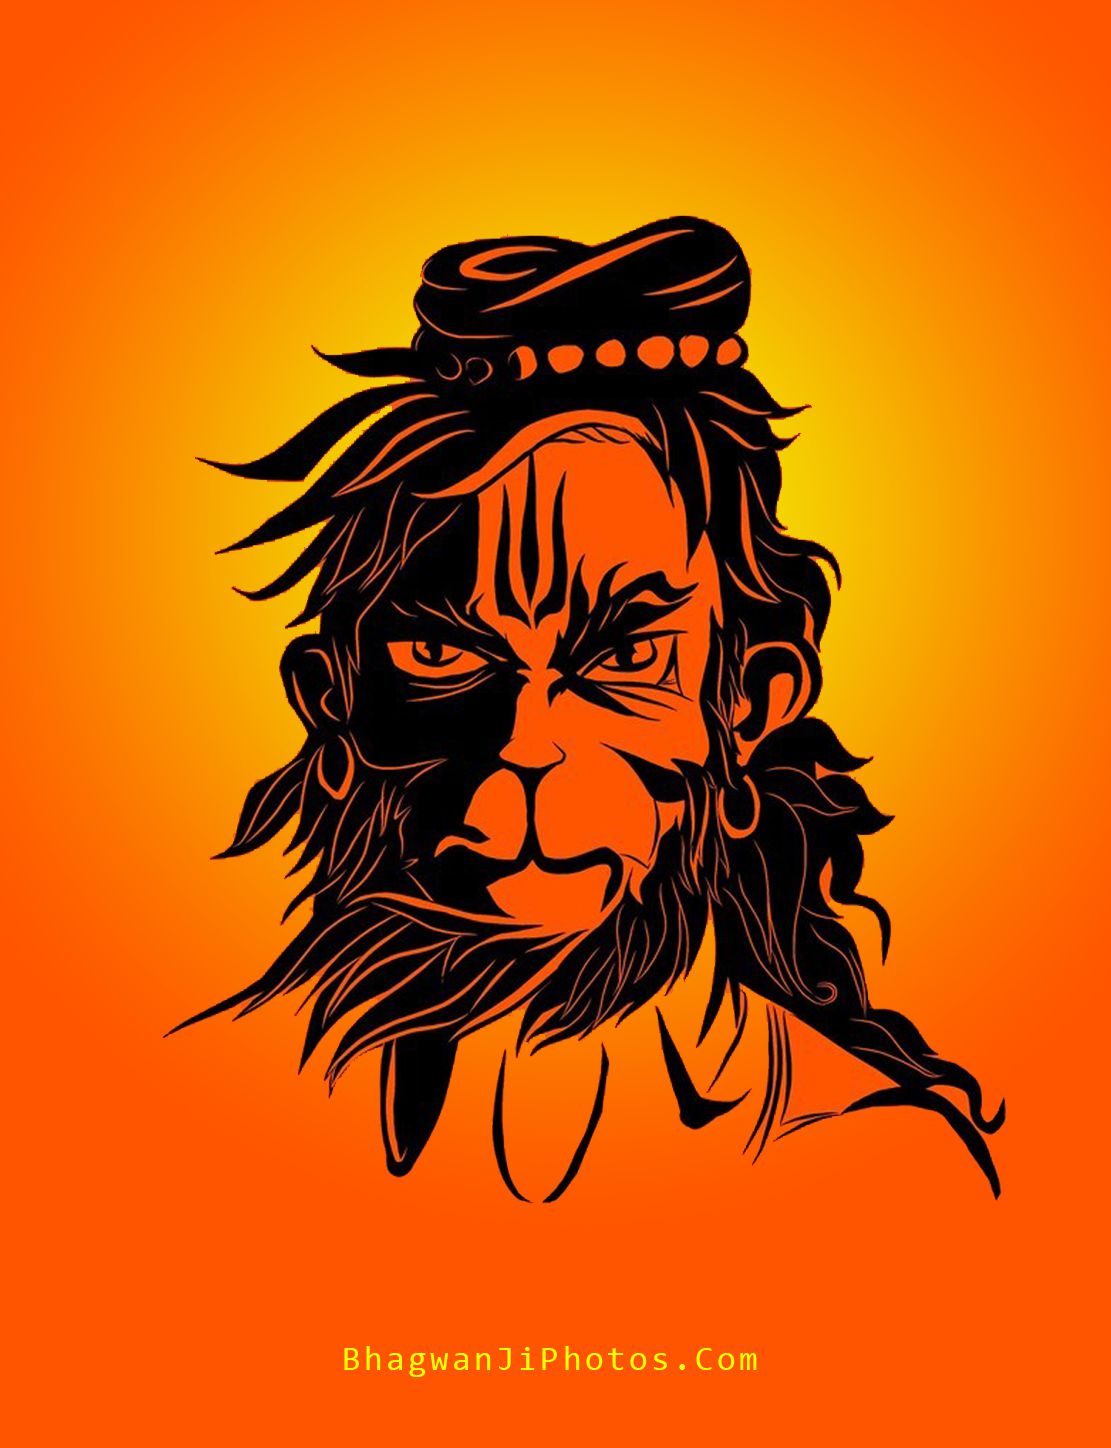 Download the Best Collection of Hanuman Images in Full 4K+: 999 ...